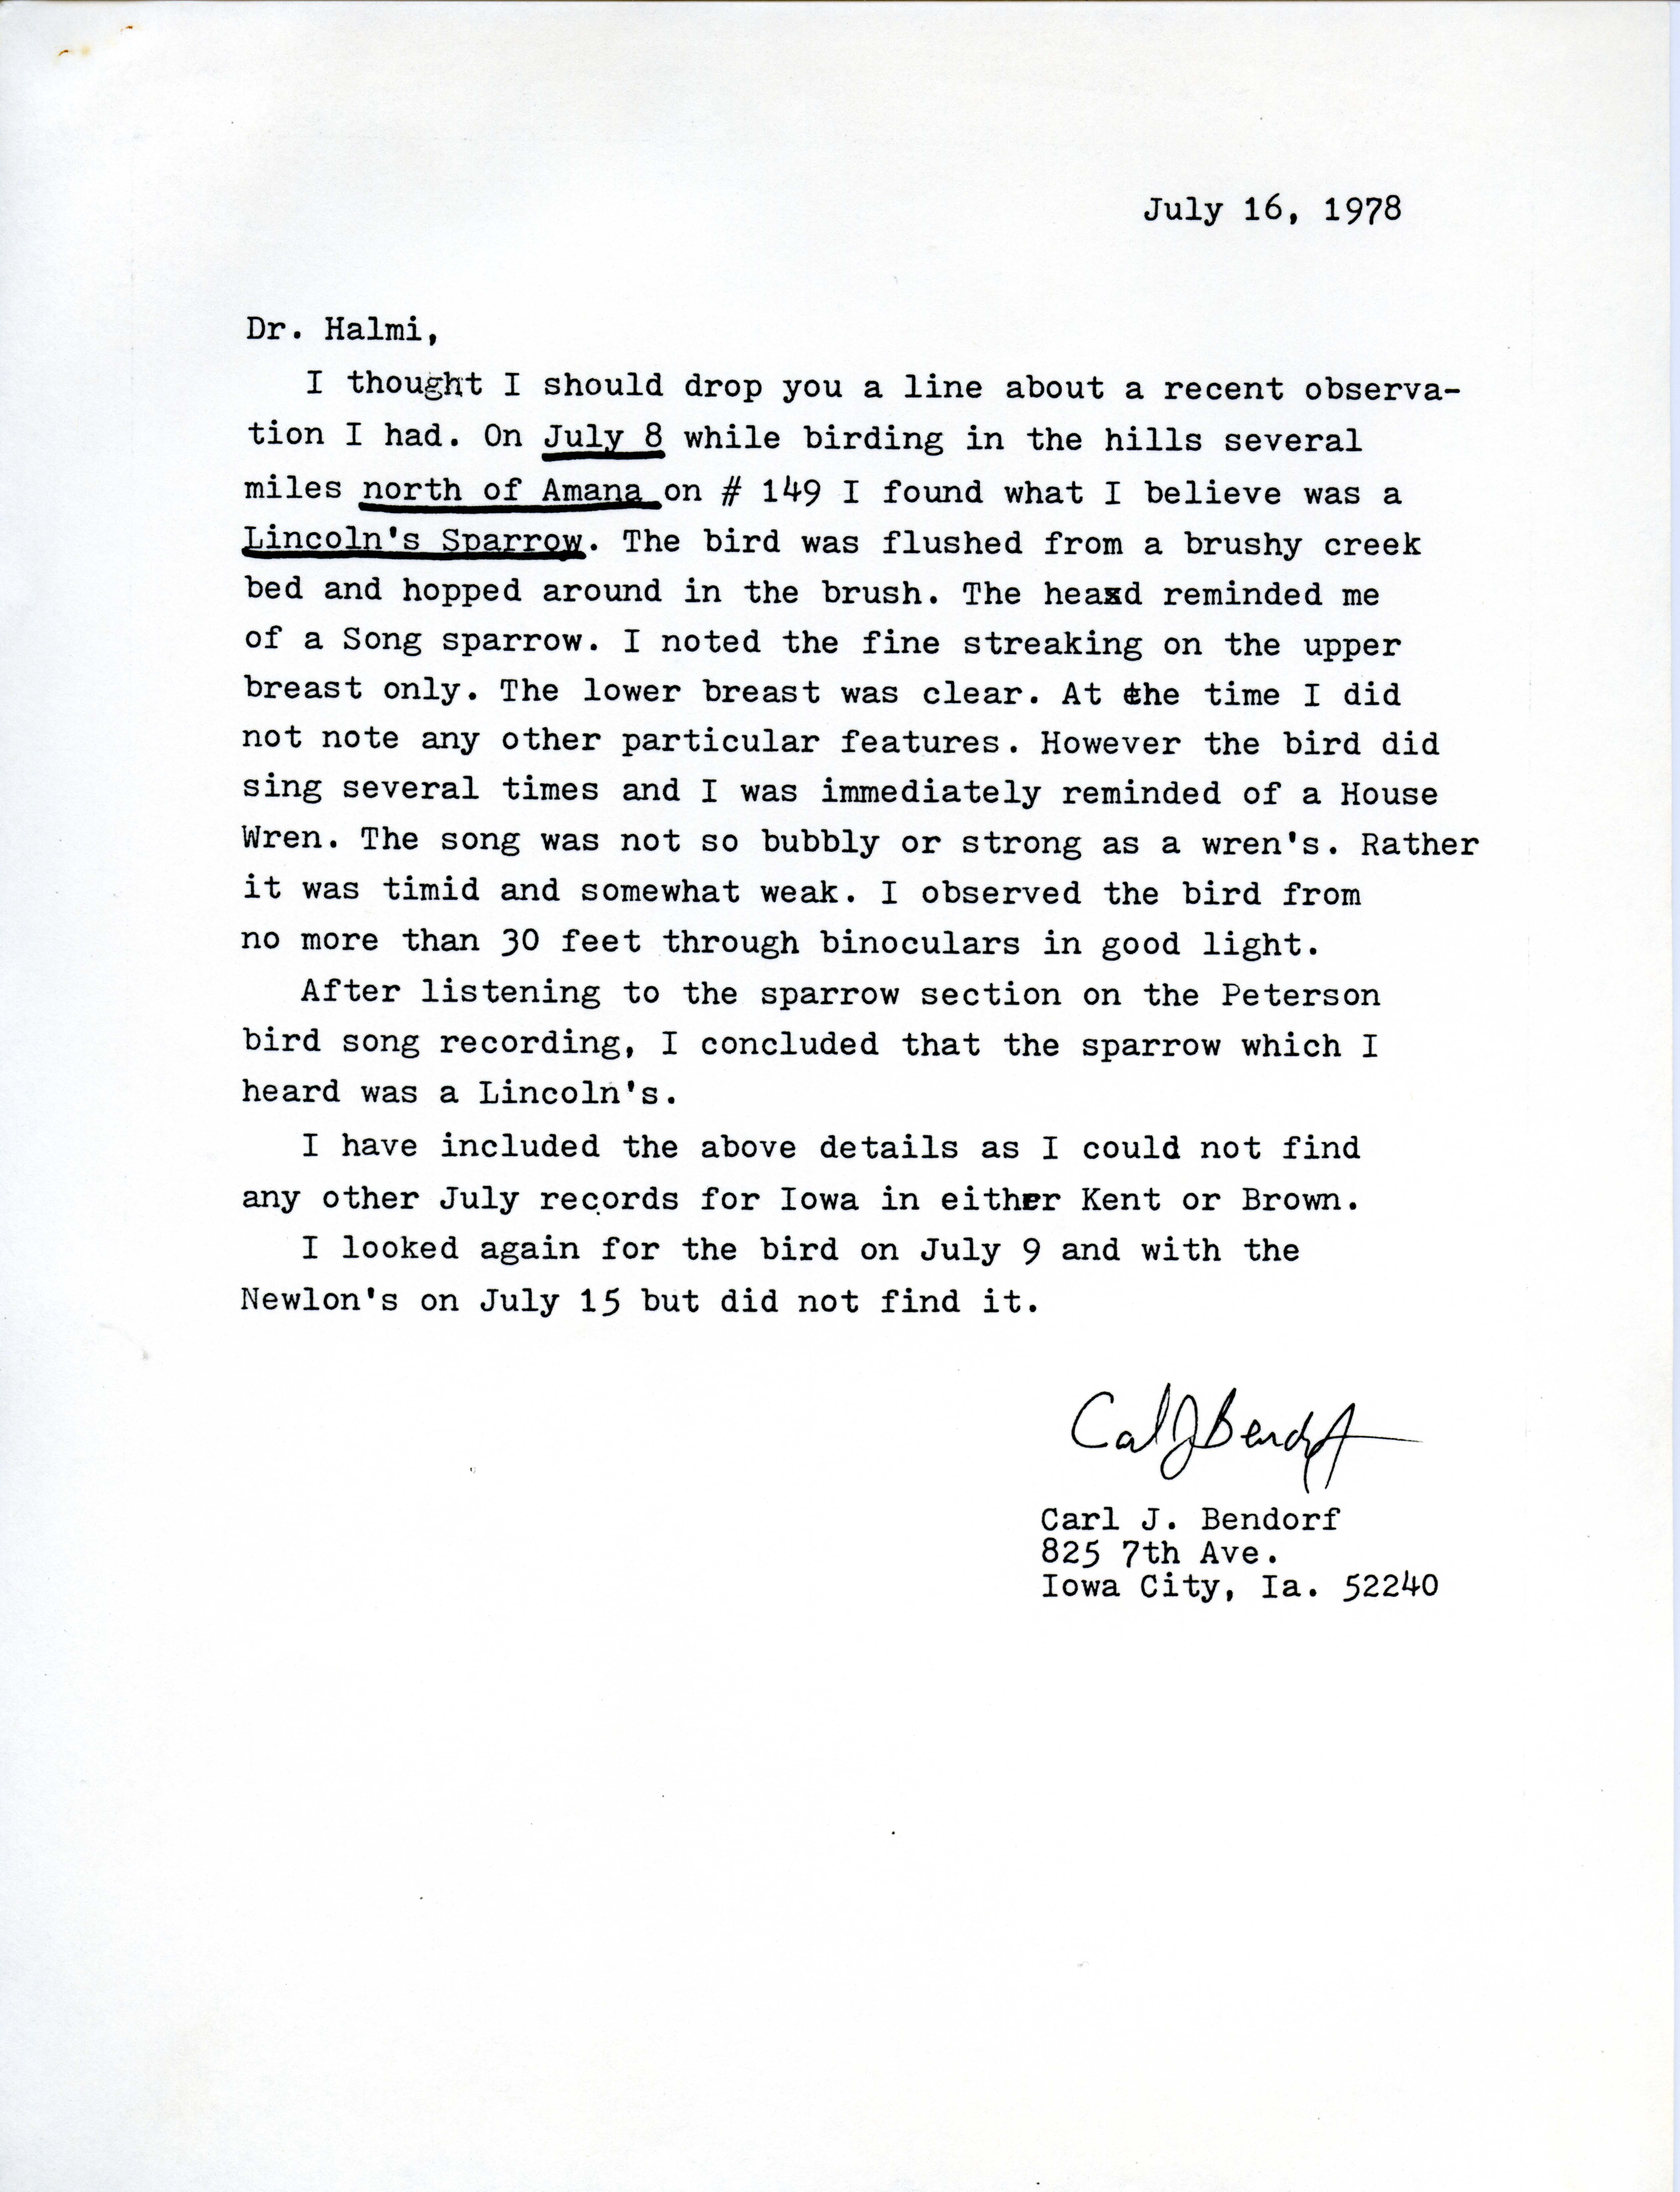 Carl J. Bendorf letter to Nicholas S. Halmi regarding the sighting of a Lincoln Sparrow, July 16, 1978 